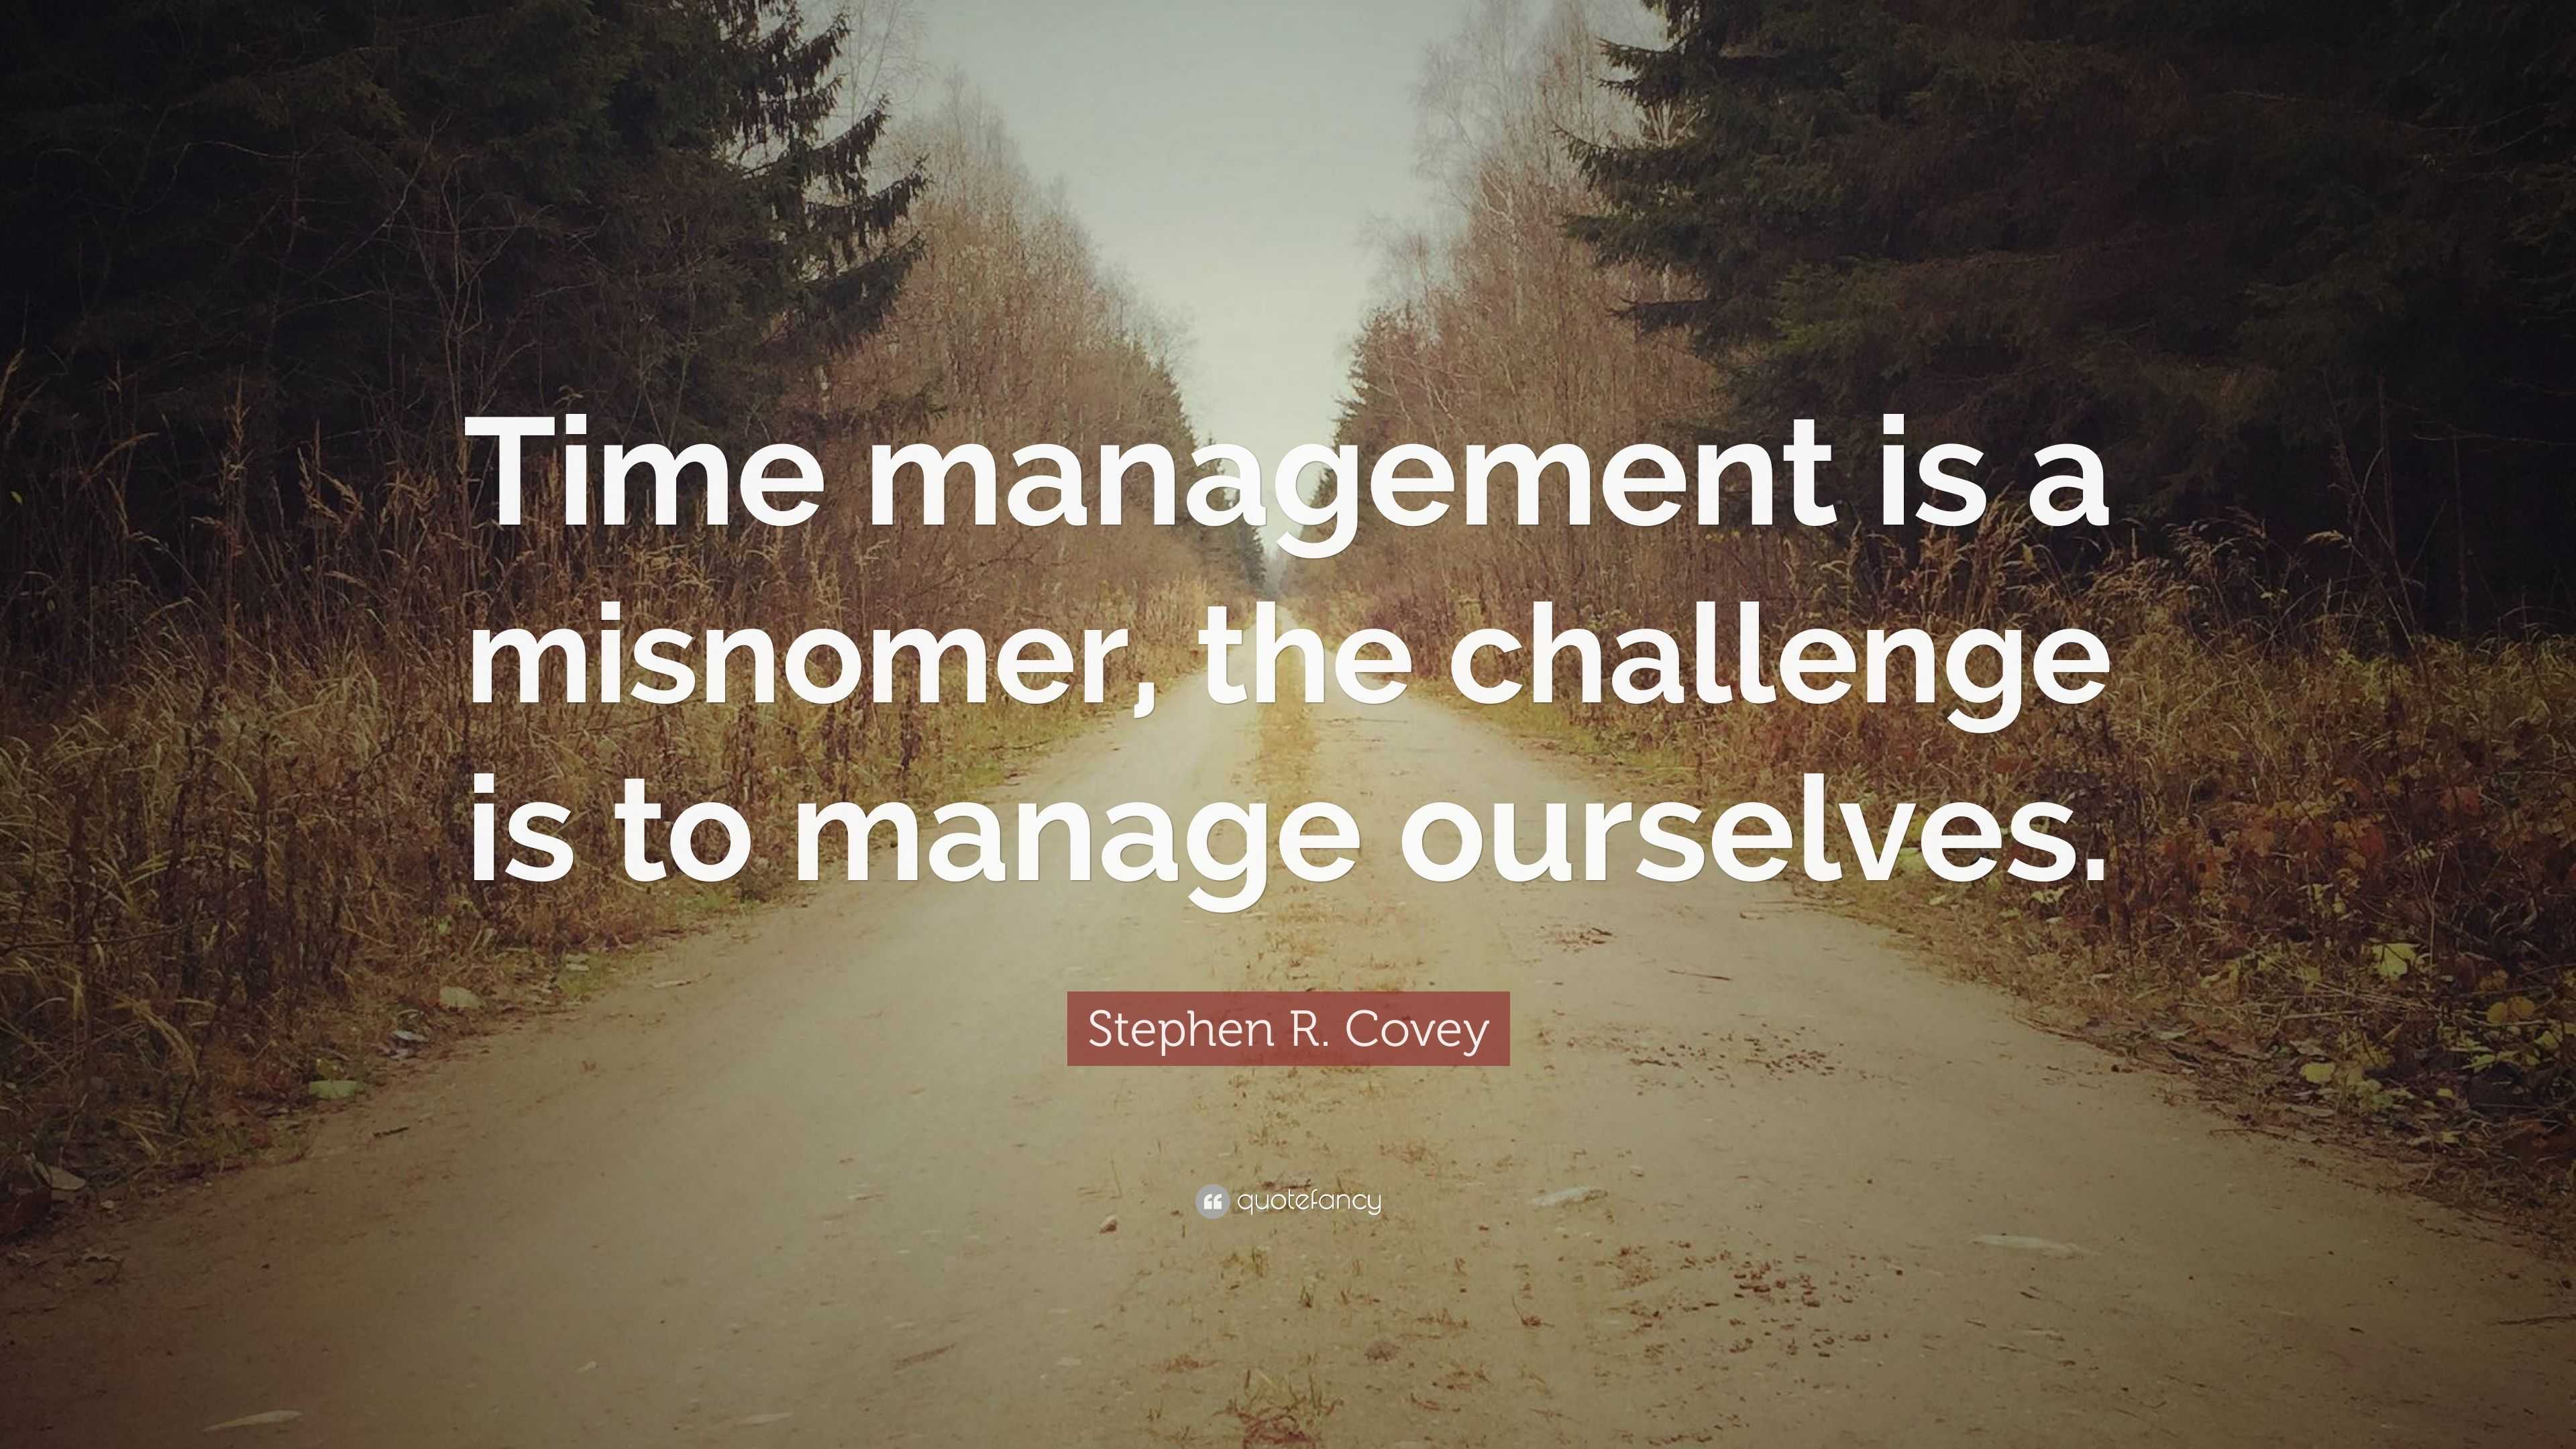 Stephen R. Covey Quote “Time management is a misnomer